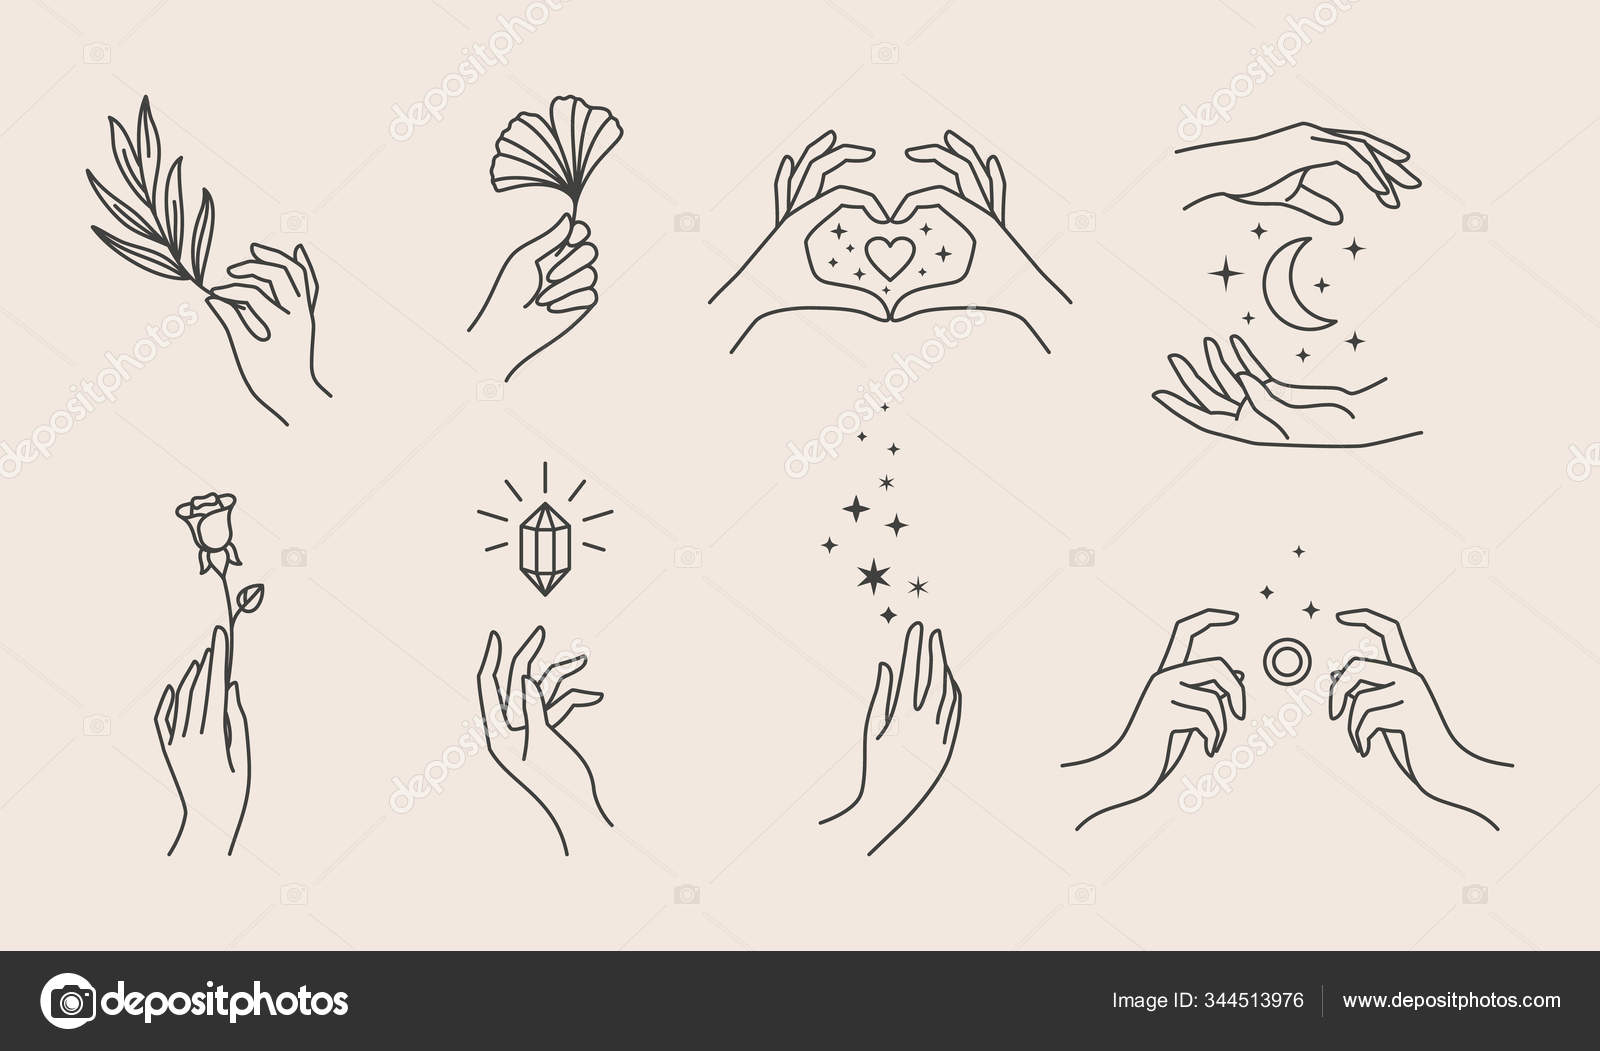 A set of women's hand logos in a minimalistic linear style. Vector ...